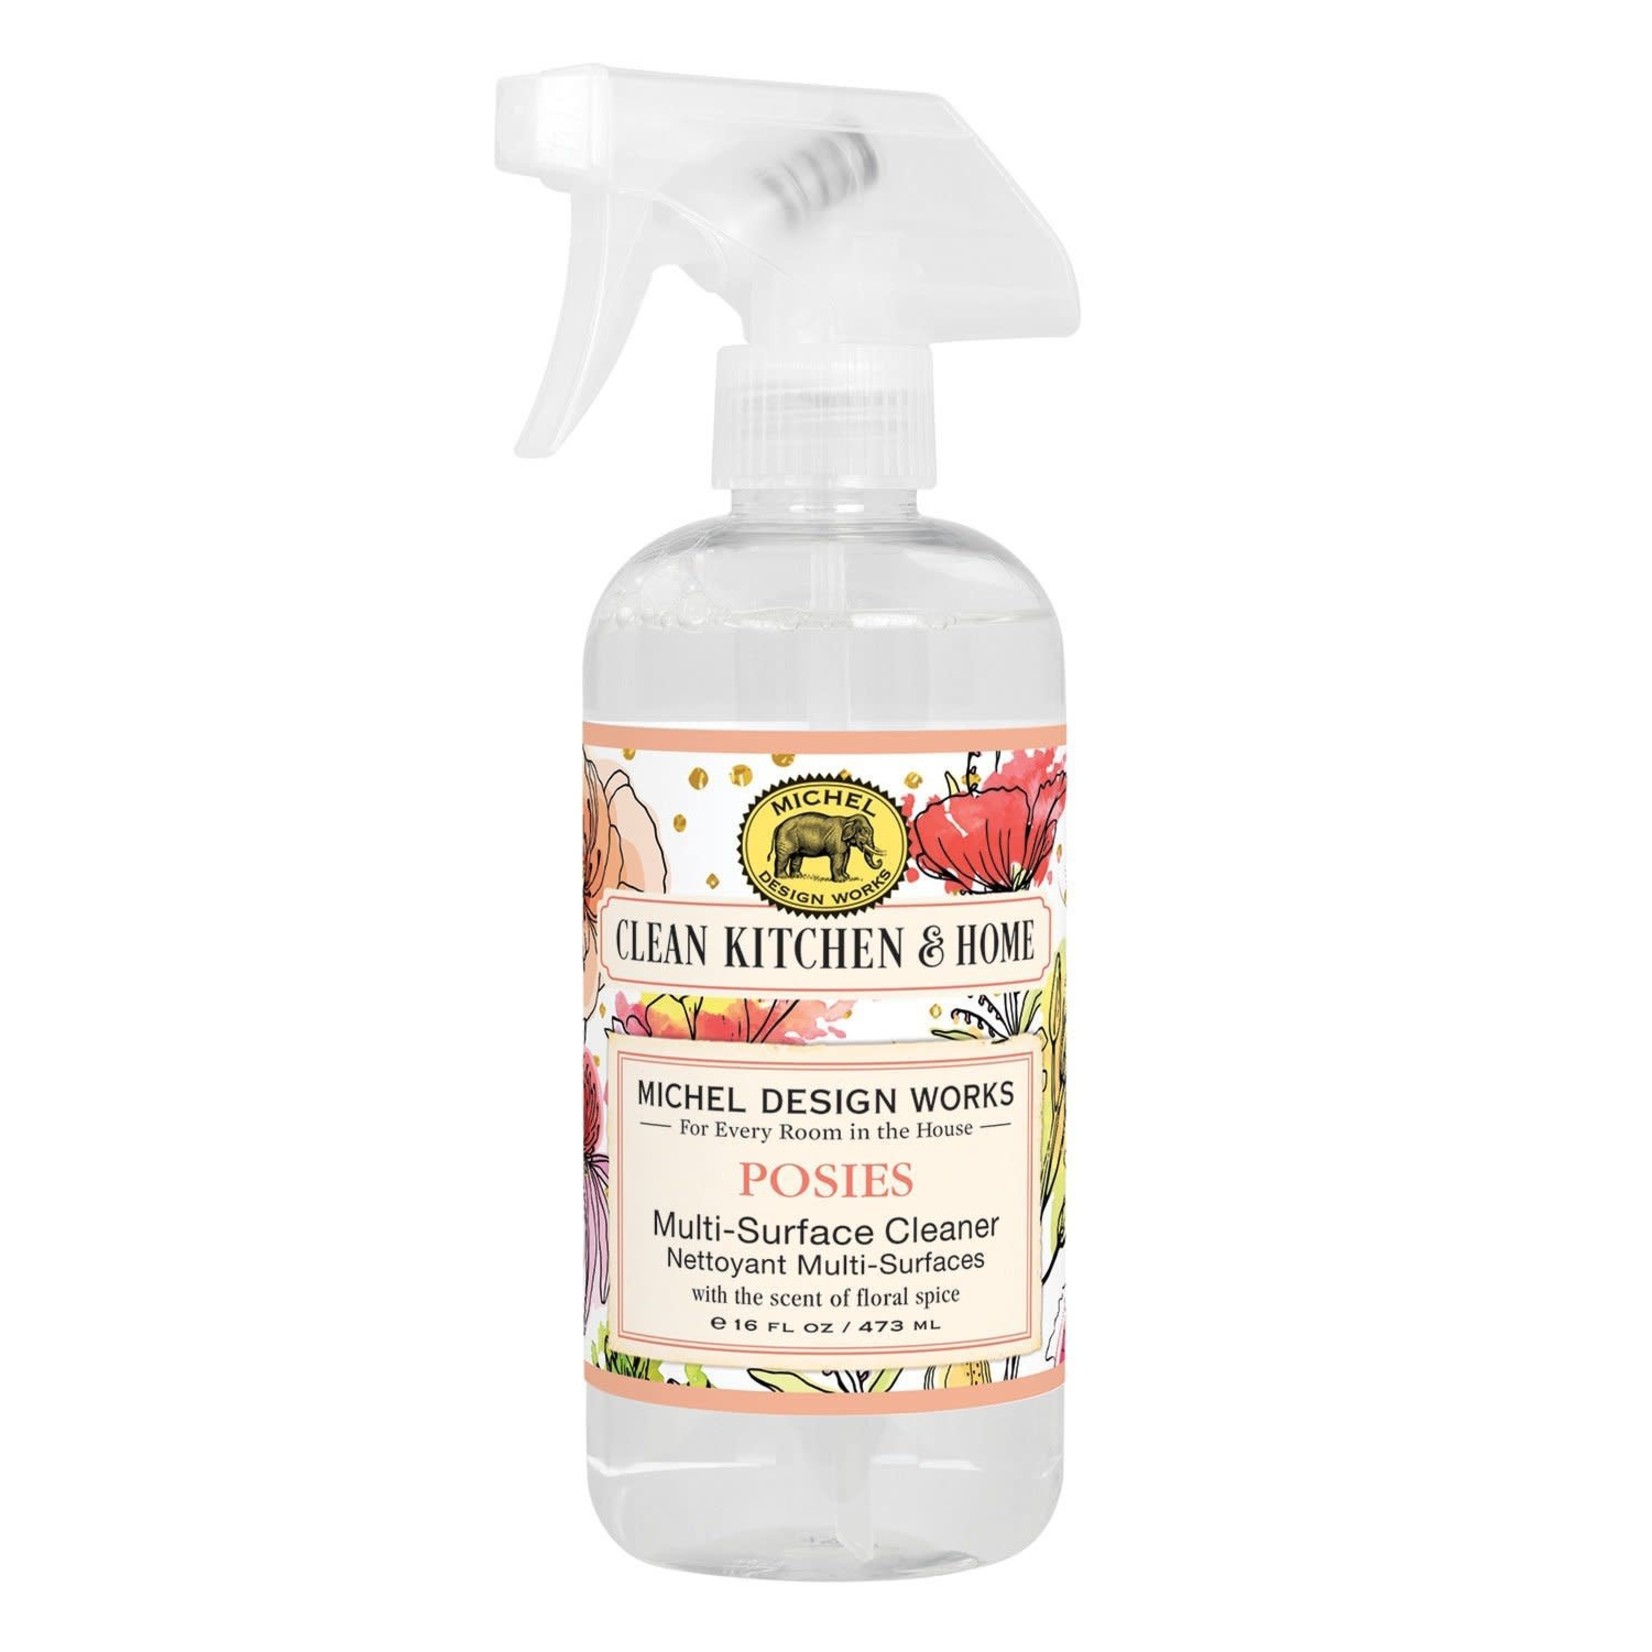 MICHELE DESIGN WORKS POSIES MULTI SURFACE CLEANER